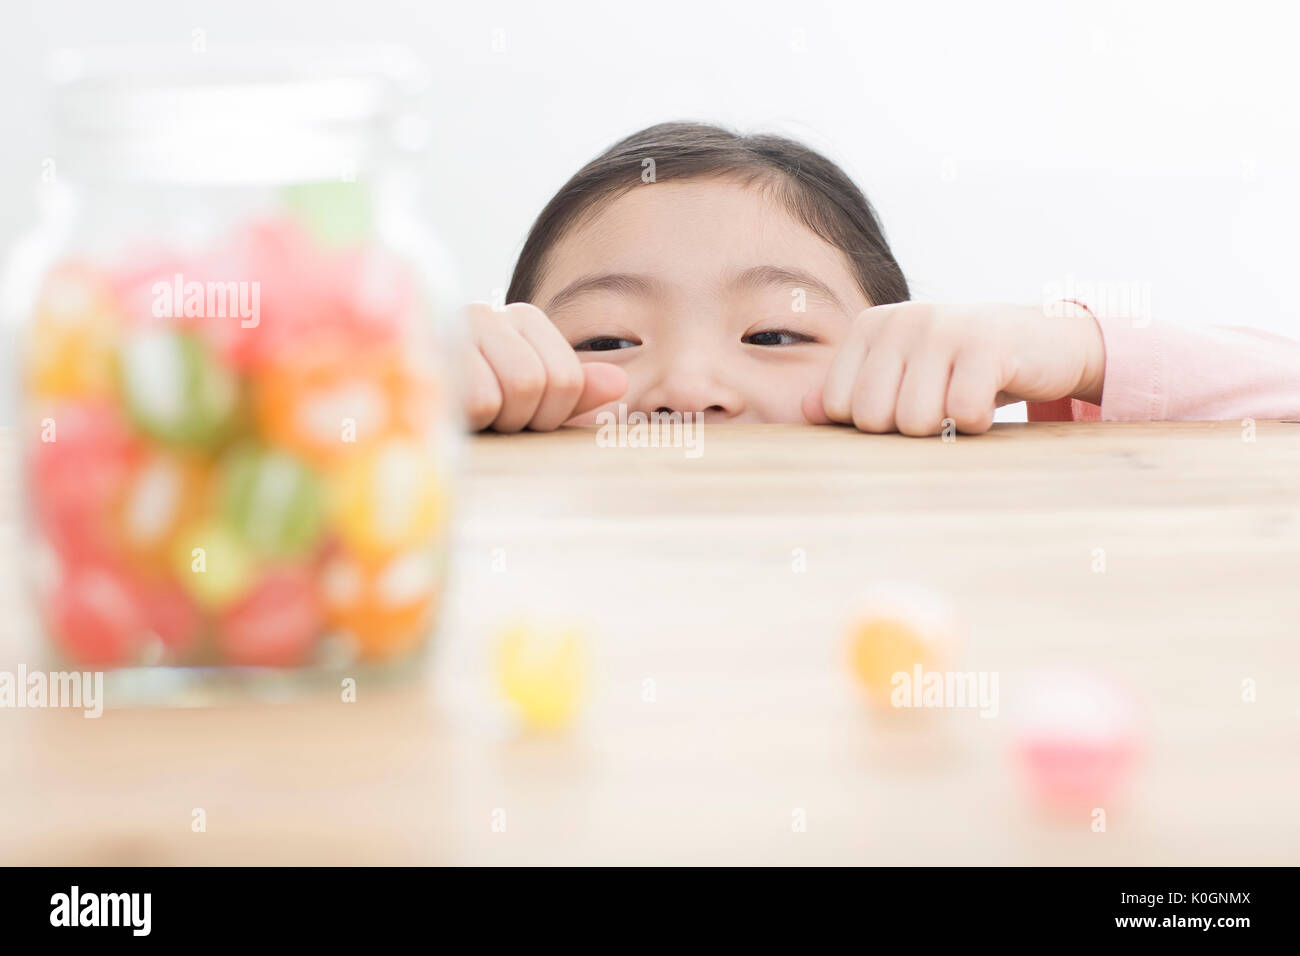 Smiling girl watching candies in a jar Stock Photo